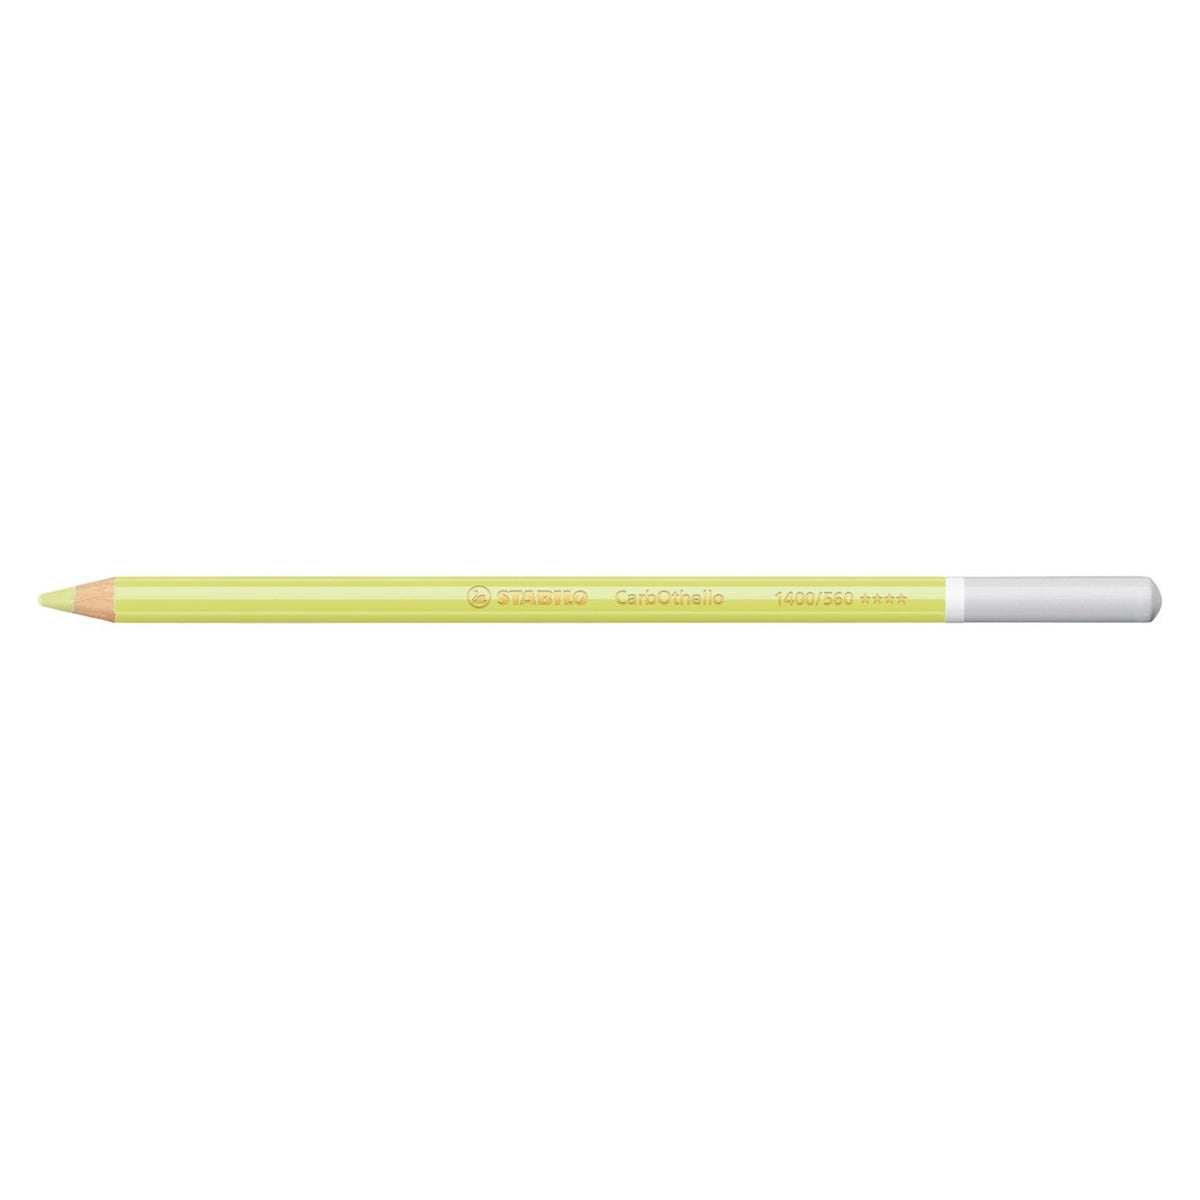 Stabilo Carbothello Pastel Pencil 560-Leaf Green Pale - merriartist.com